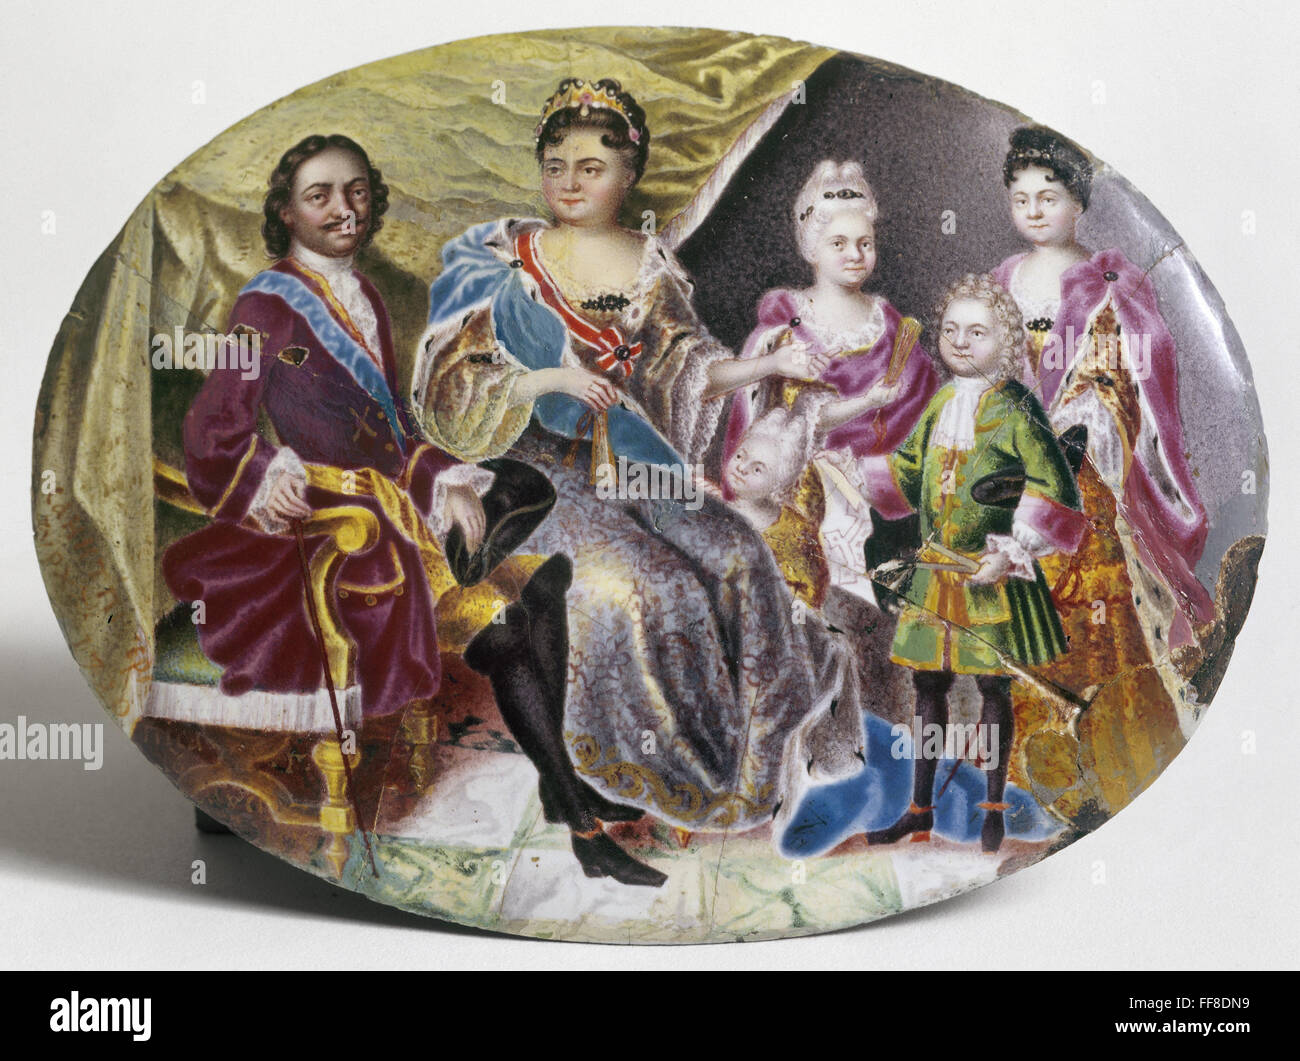 PETER THE GREAT (1672-1725). /nCzar of Russia, 1682-1725. Peter the Great with his second wife, Catherine I, and children. Enamel miniature painting by Grigory Semyonovich Musikiysky, 1720. Stock Photo